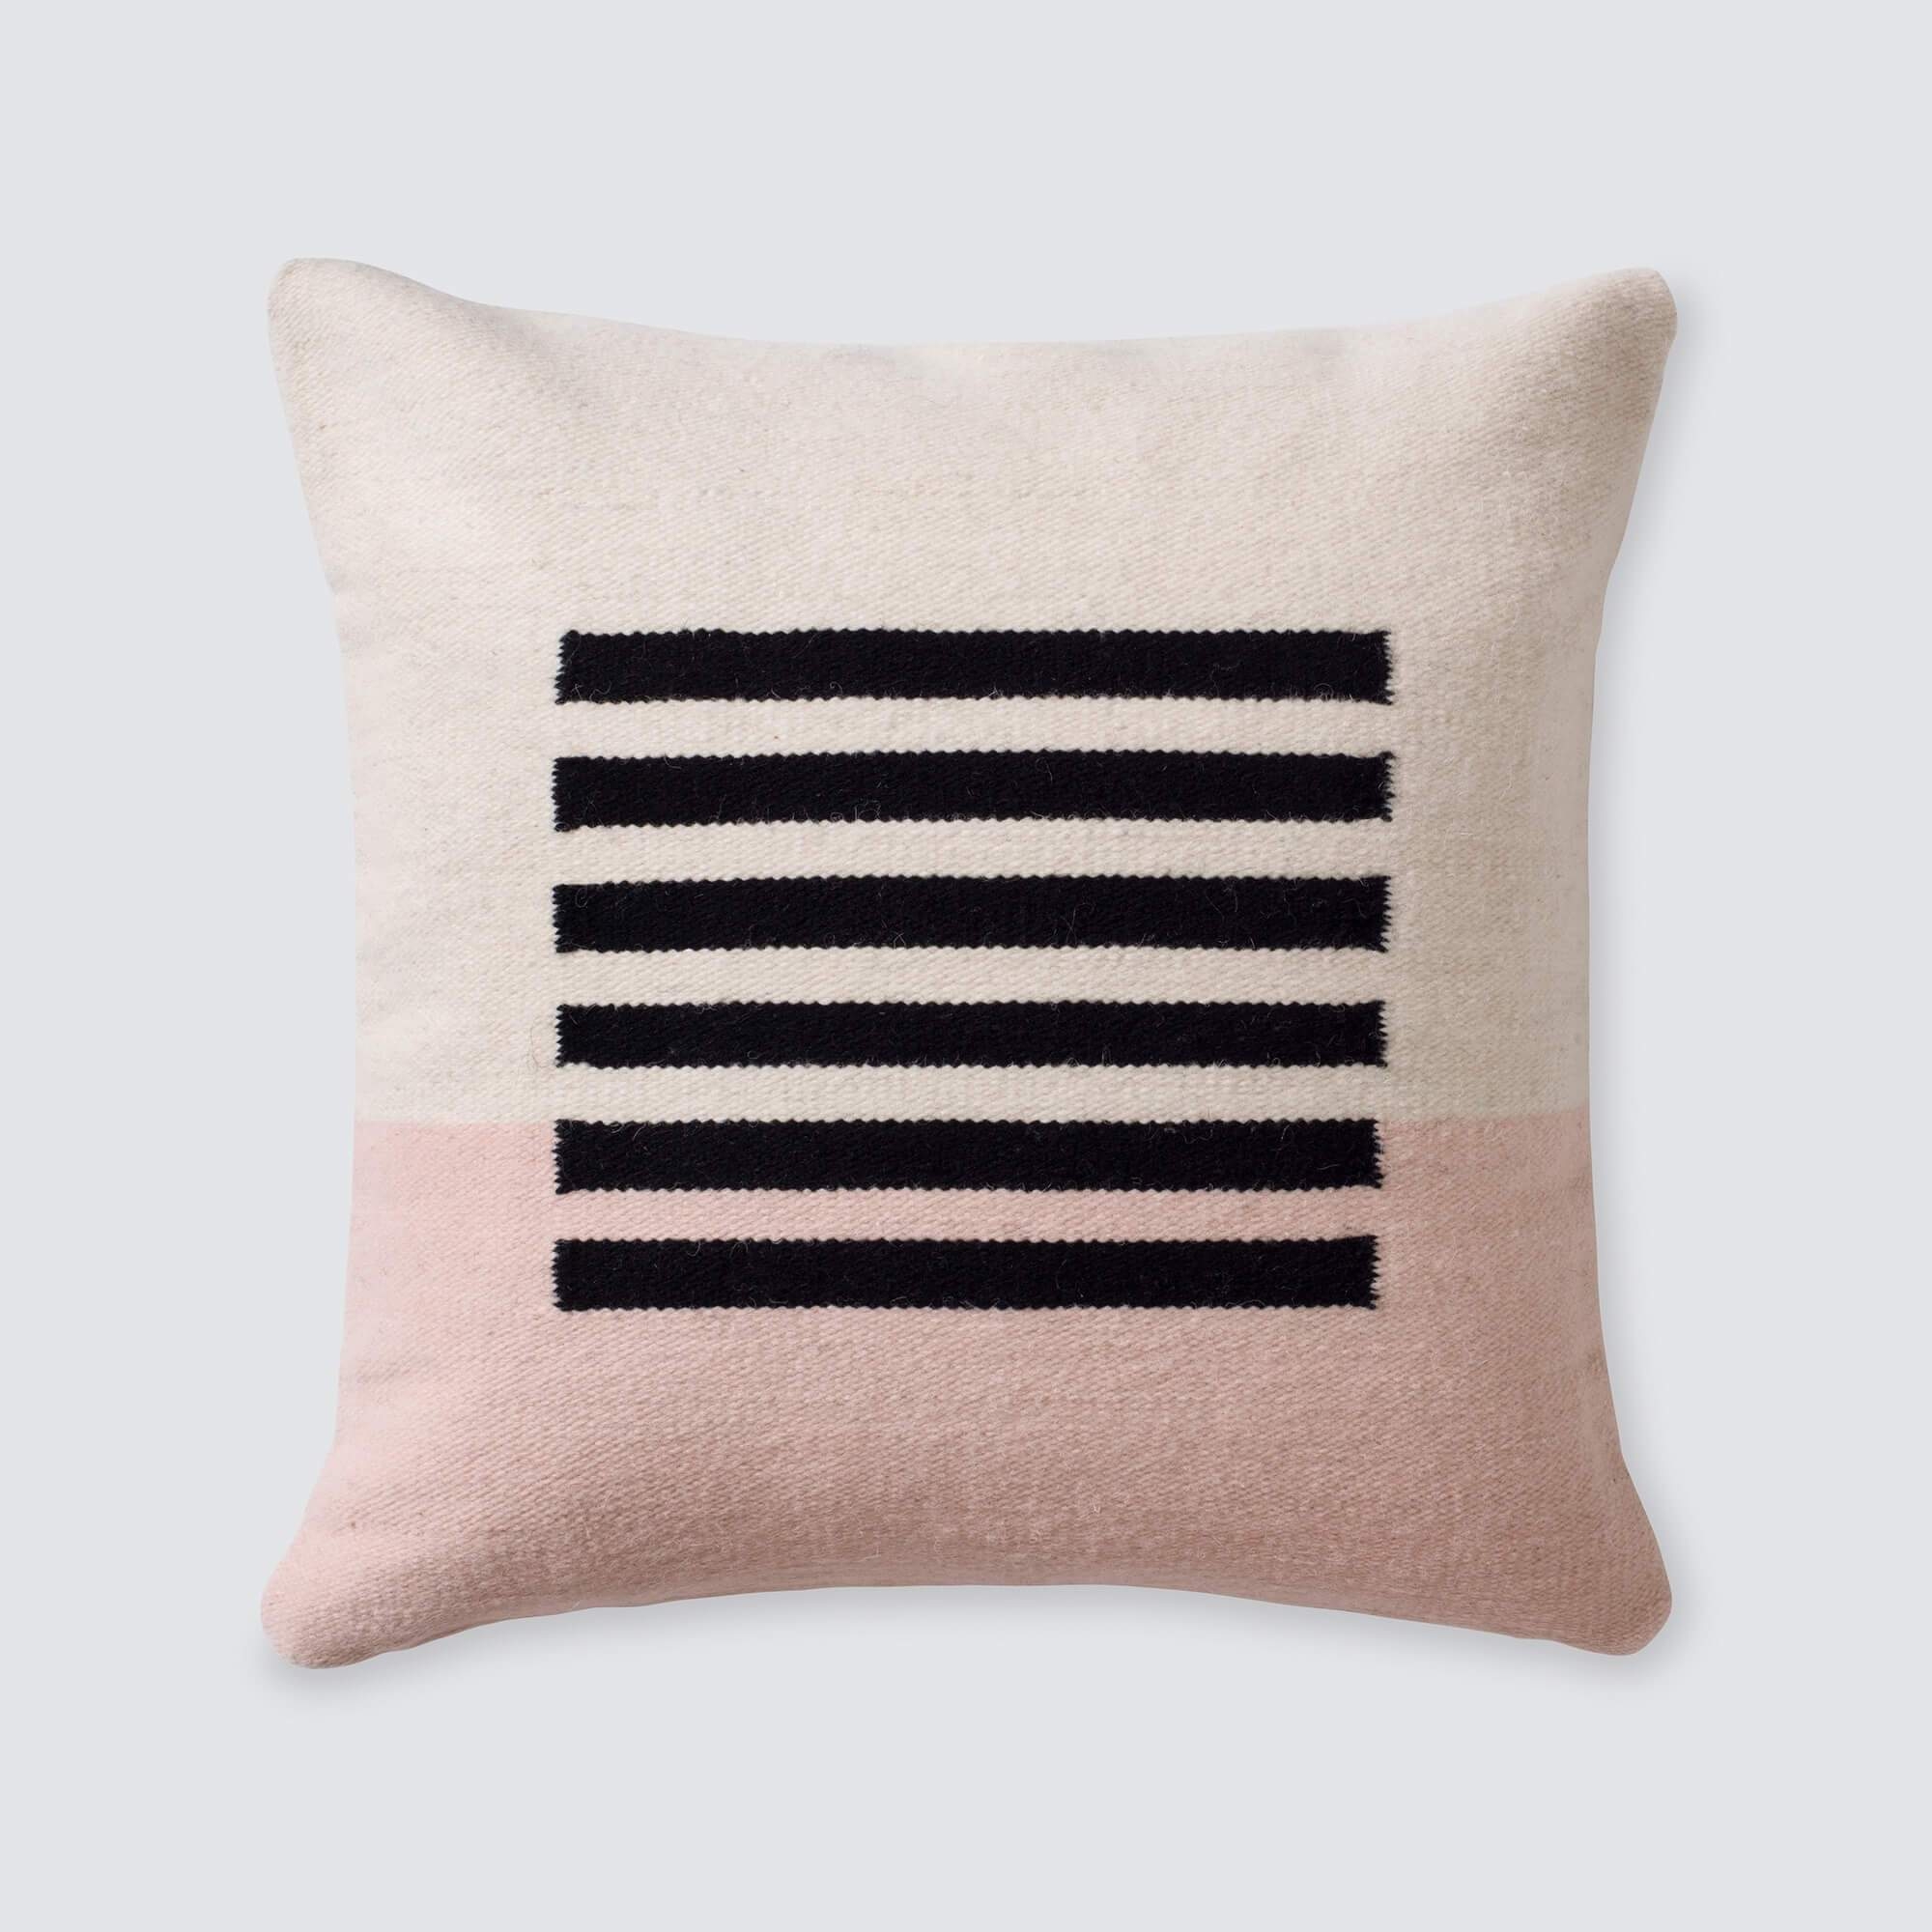 Cuño Pillow By The Citizenry - Image 0